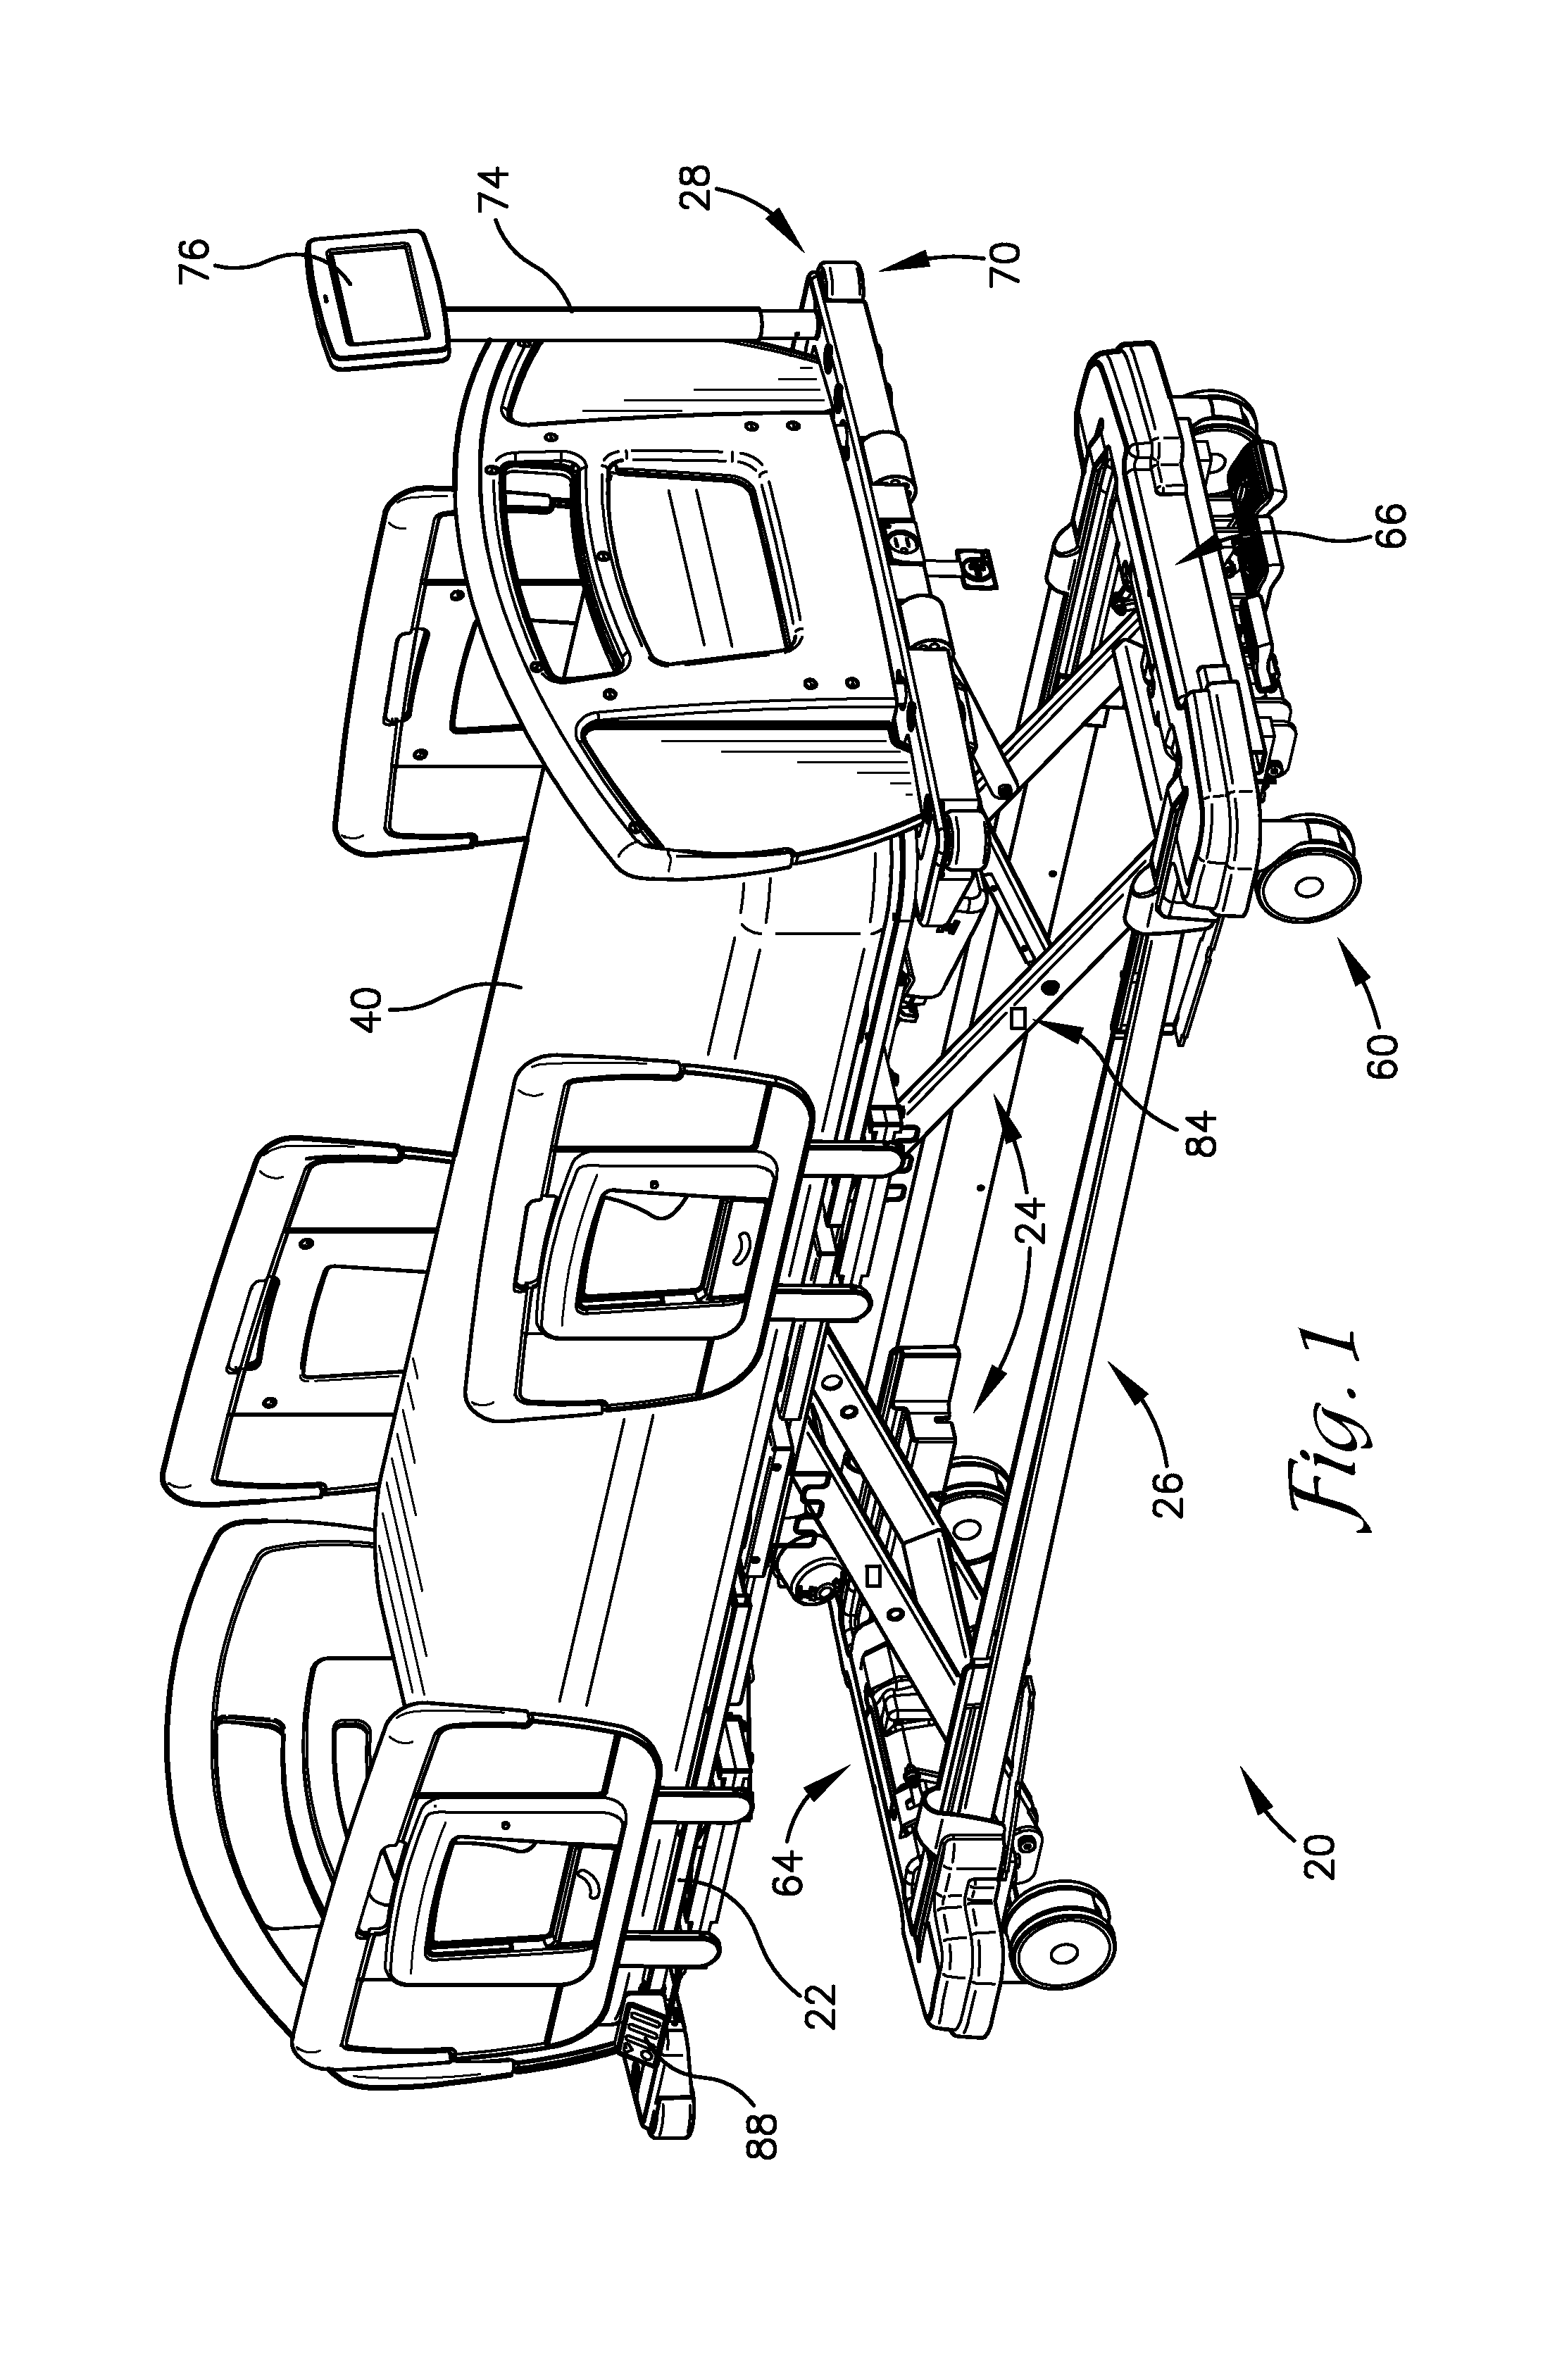 Auto leveling low profile patient support apparatus